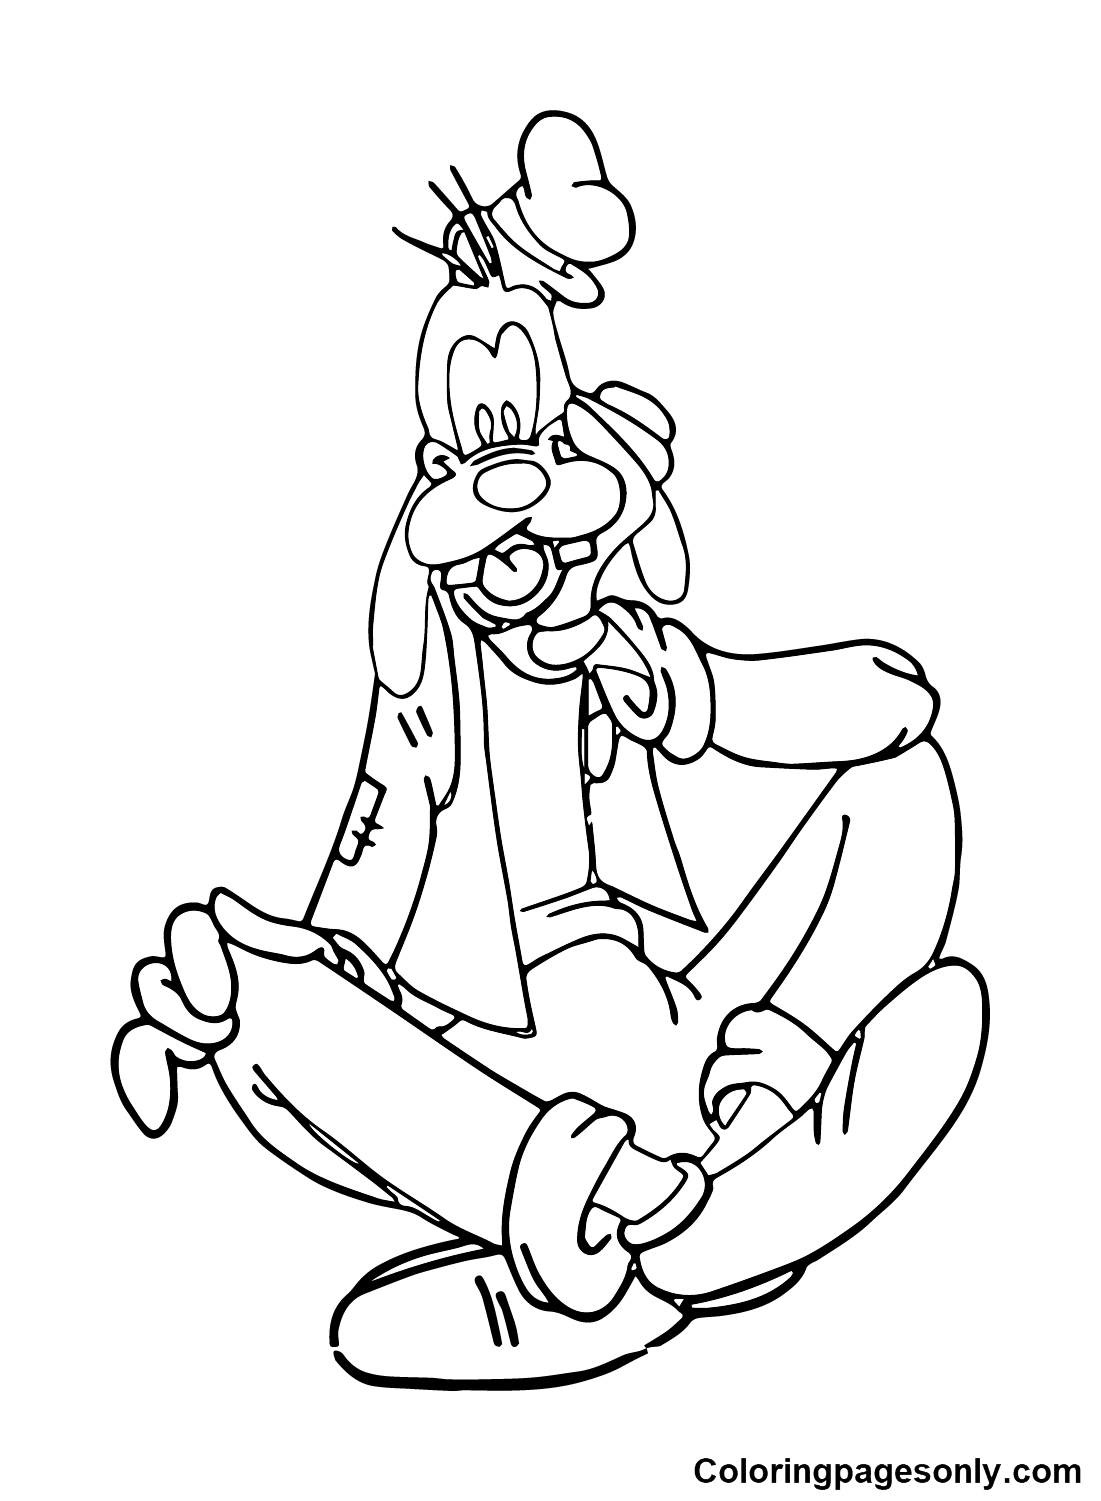 Goofy Kingdom Hearts Coloring Pages